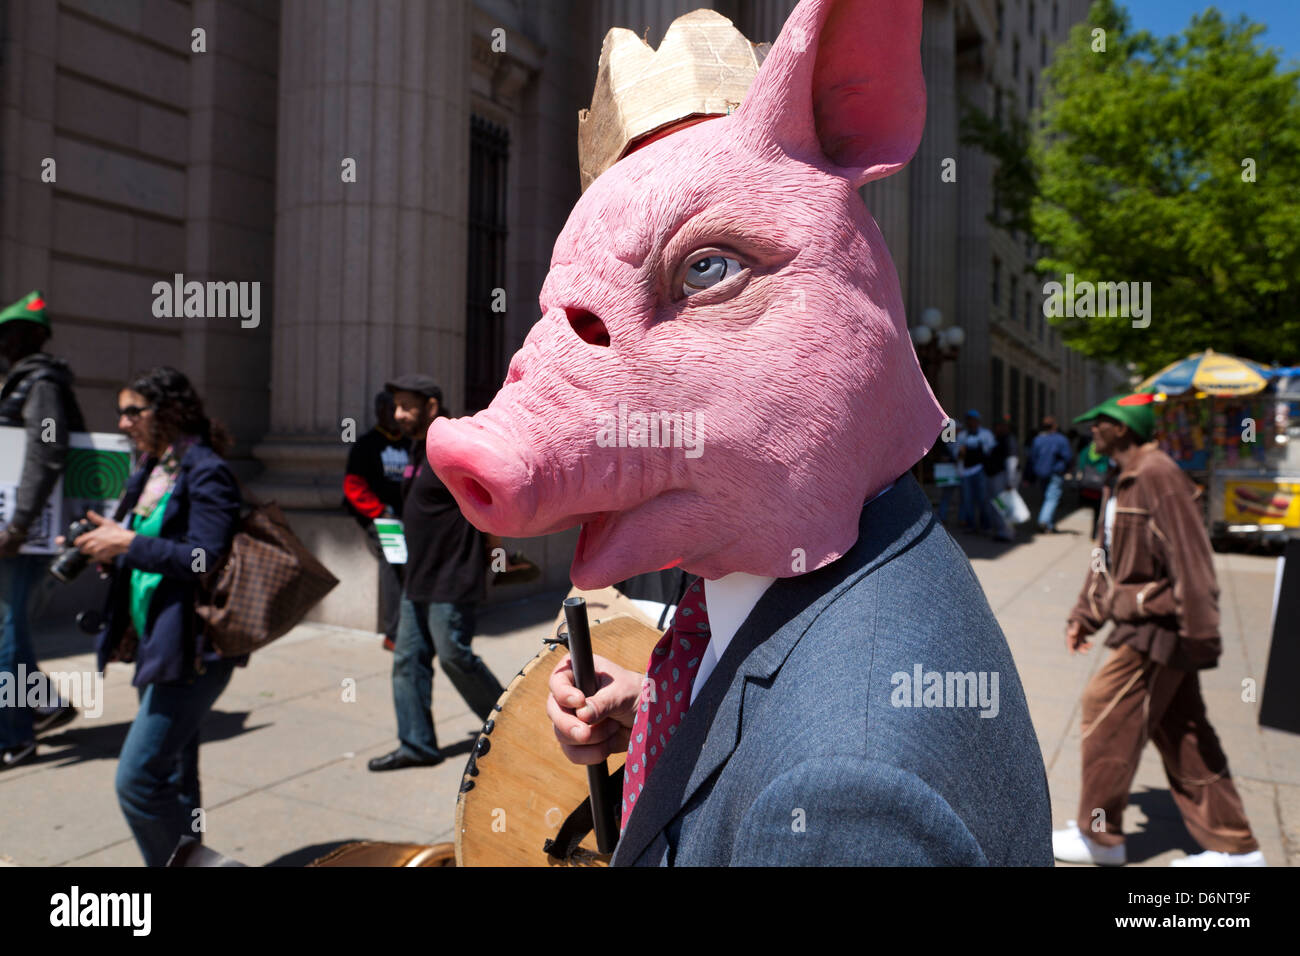 Man wearing a pig mask in rally Stock Photo